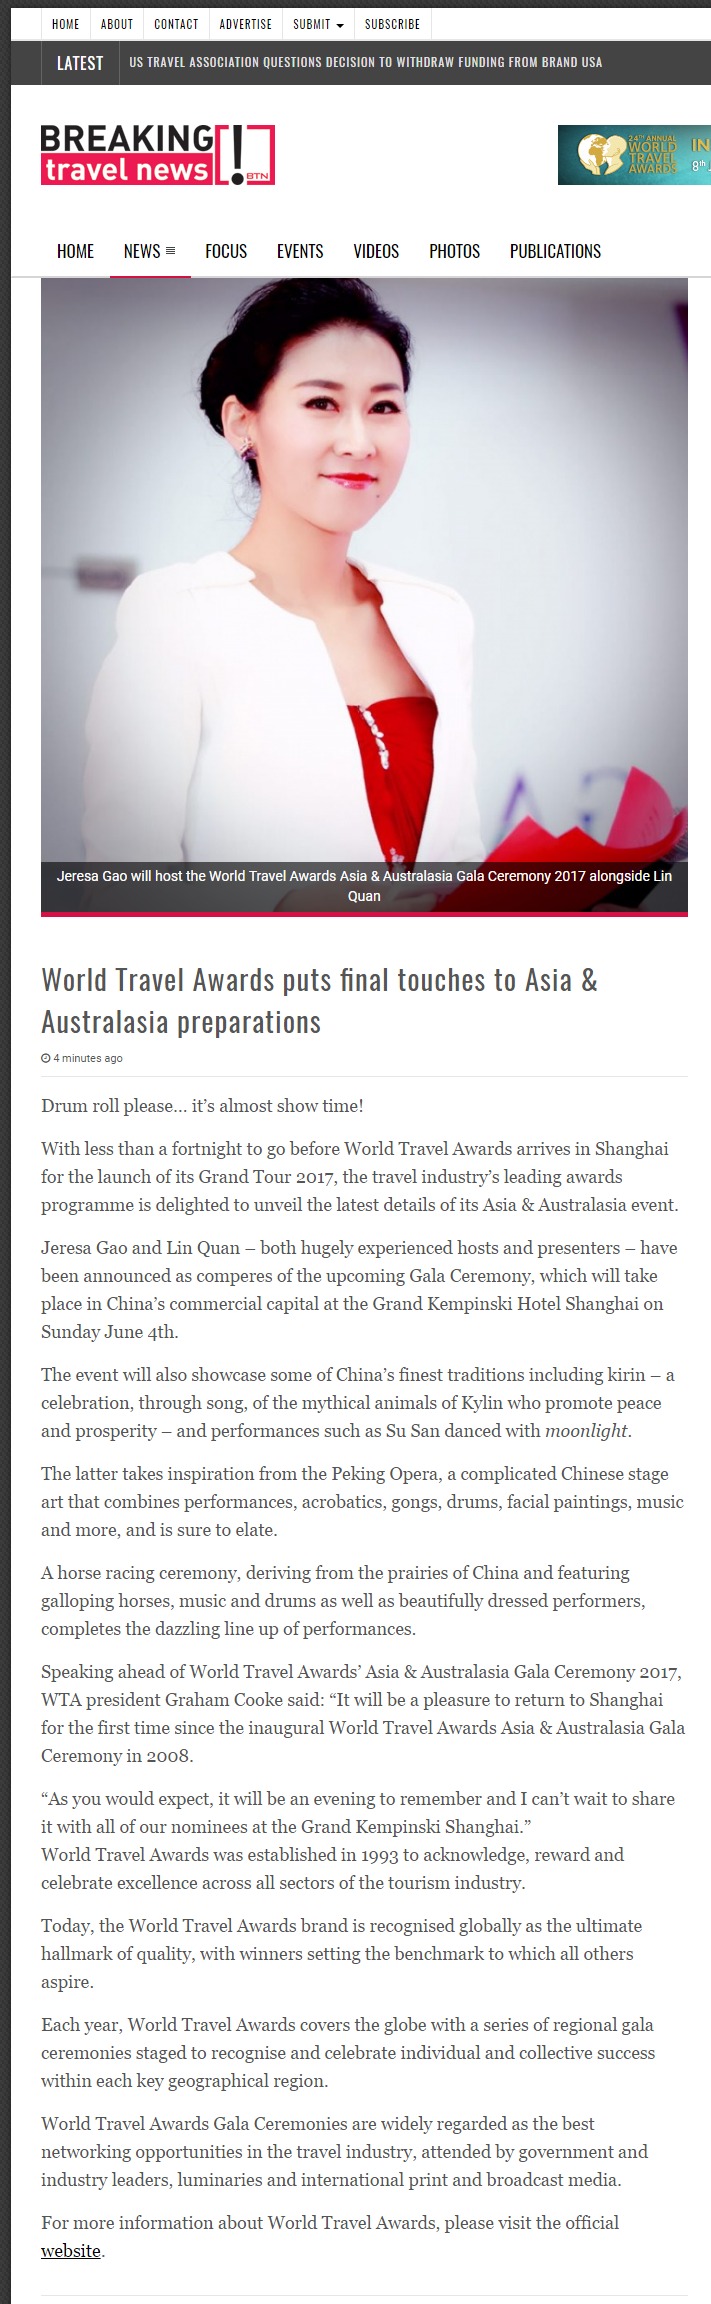 http://www.breakingtravelnews.com/news/article/world-travel-awards-puts-final-touches-to-asia-australasia-preparations/